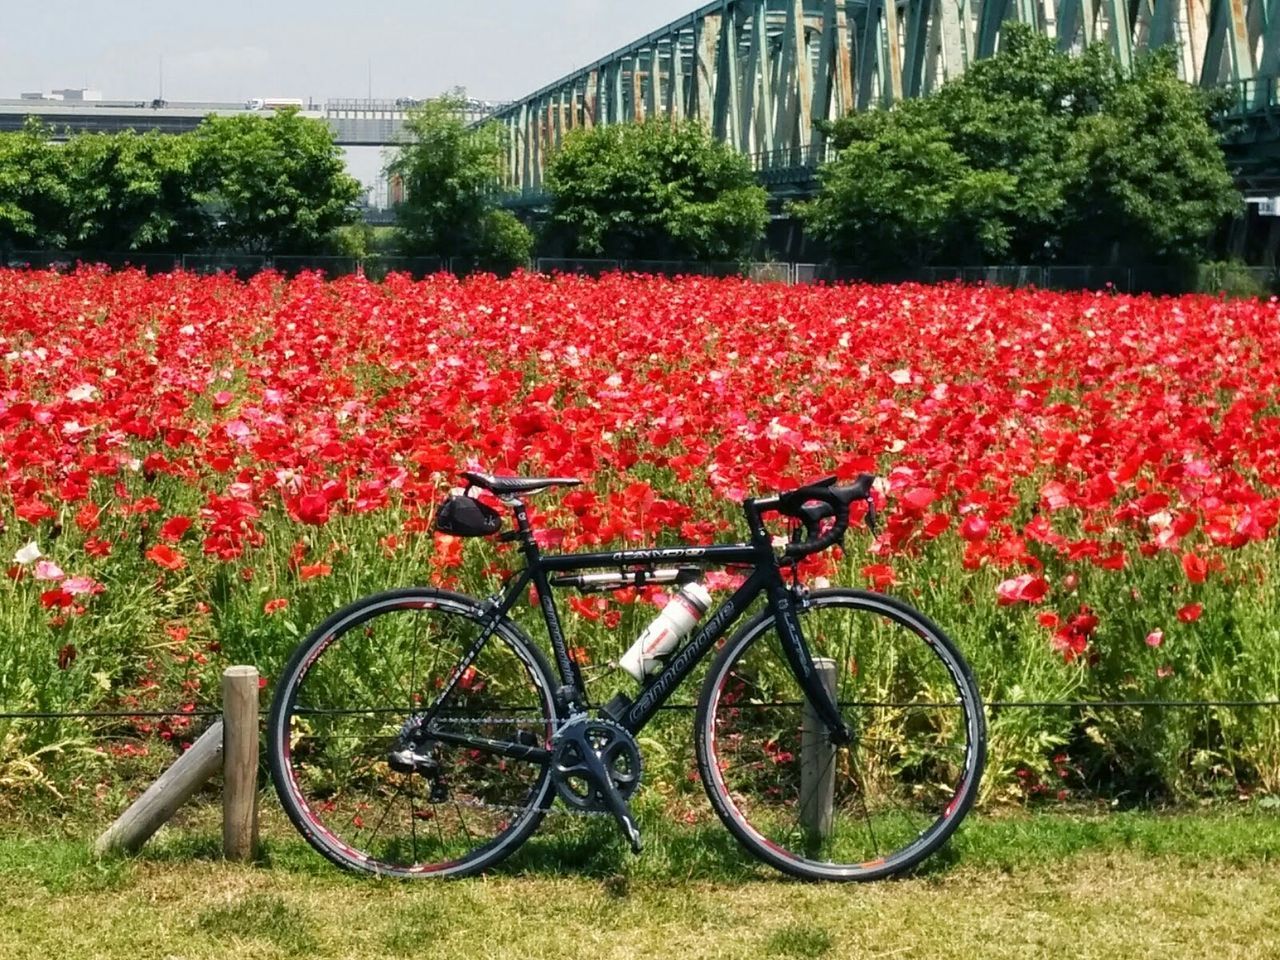 bicycle, flower, growth, transportation, mode of transport, grass, tree, land vehicle, plant, red, beauty in nature, parked, nature, freshness, stationary, tranquility, day, parking, field, no people